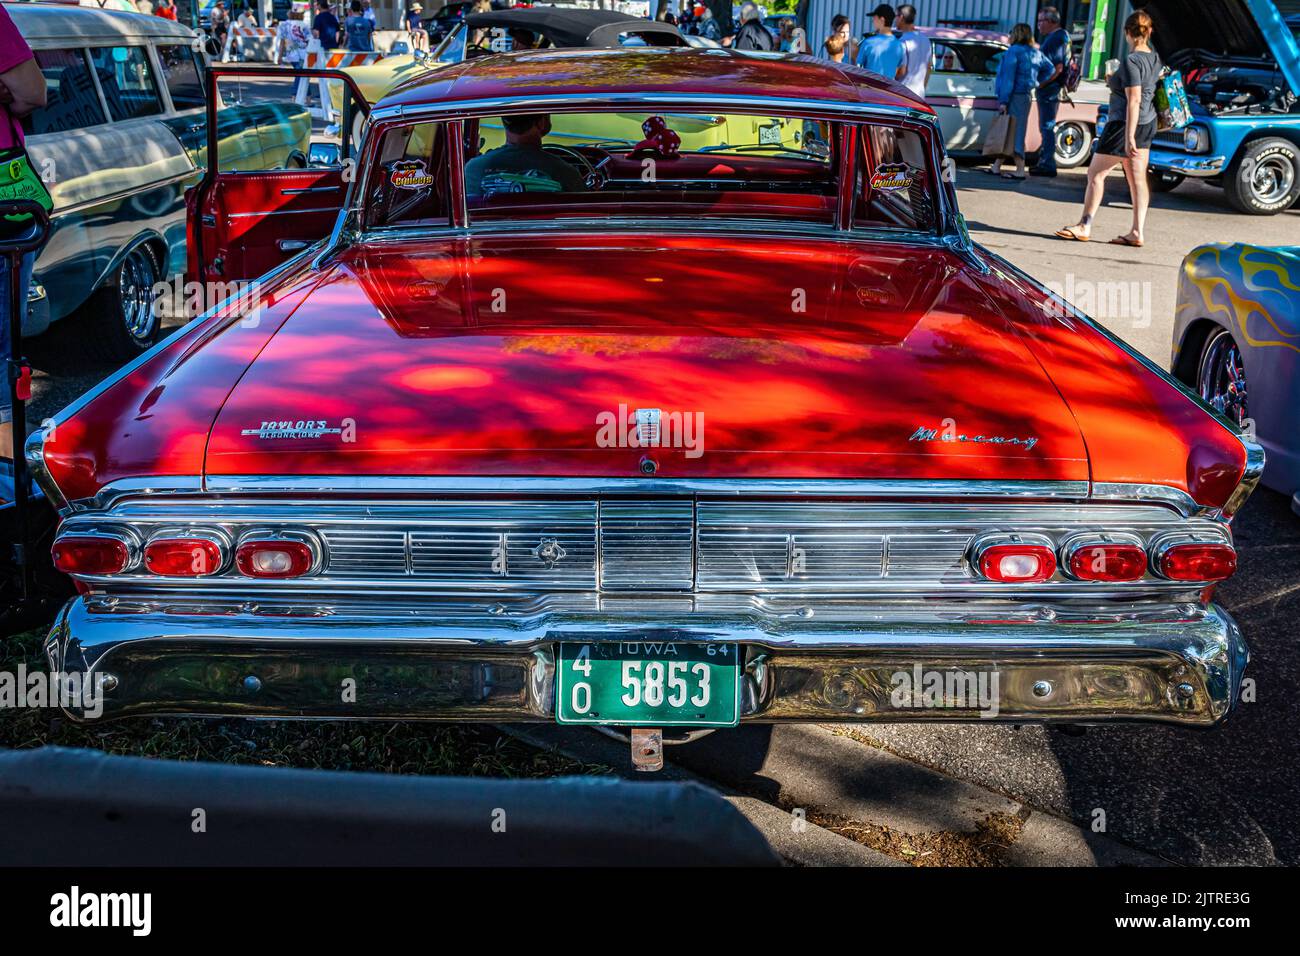 Falcon Heights, MN - June 17, 2022: High perspective rear view of a 1964 Mercury Montclair Breezeway Sedan at a local car show. Stock Photo